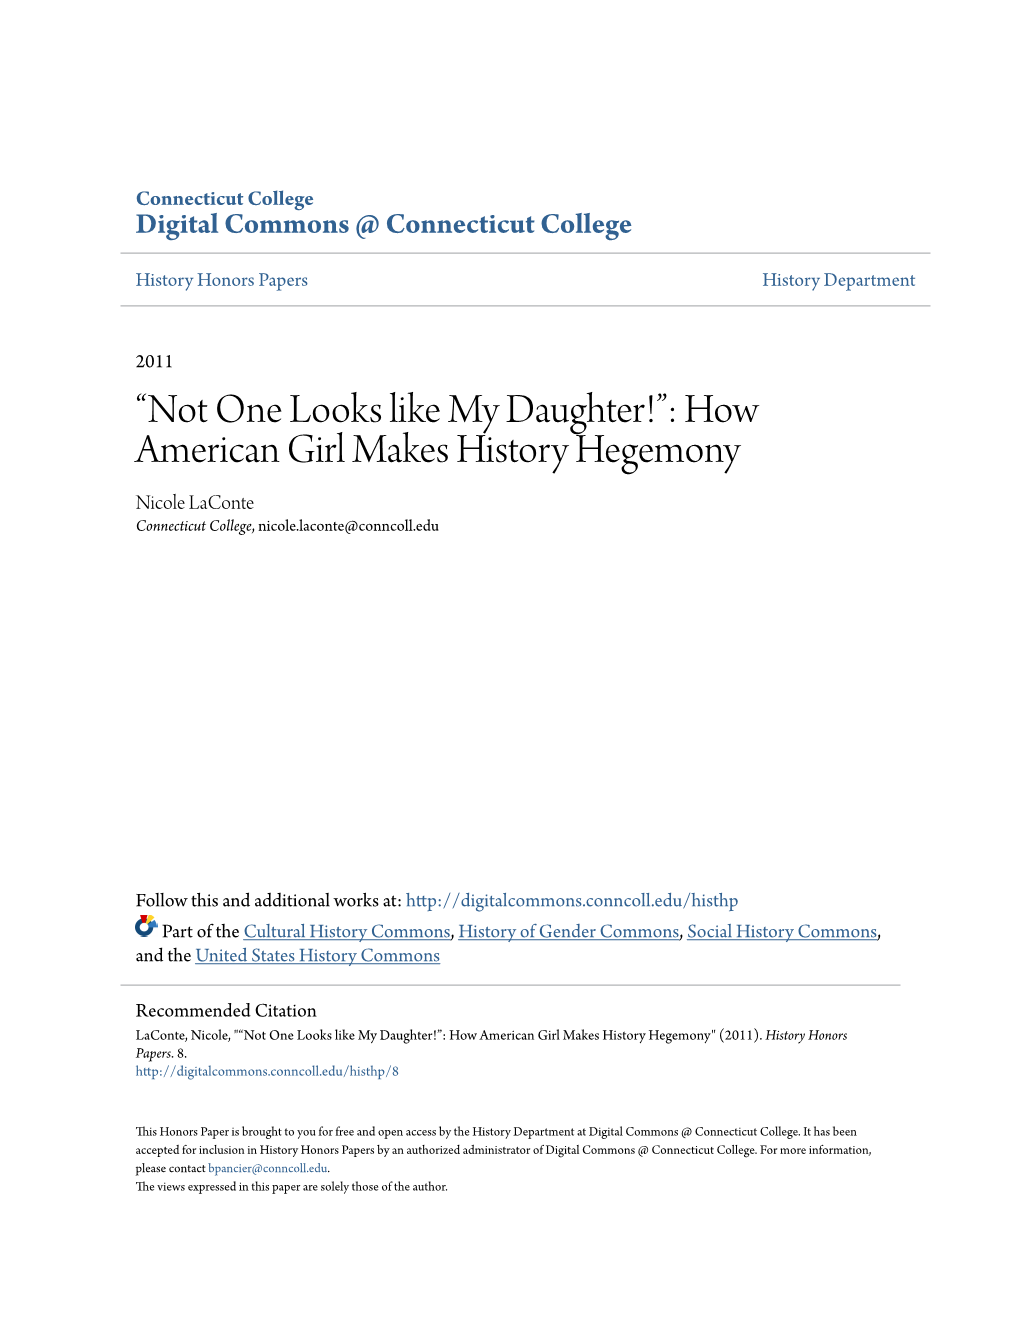 How American Girl Makes History Hegemony Nicole Laconte Connecticut College, Nicole.Laconte@Conncoll.Edu